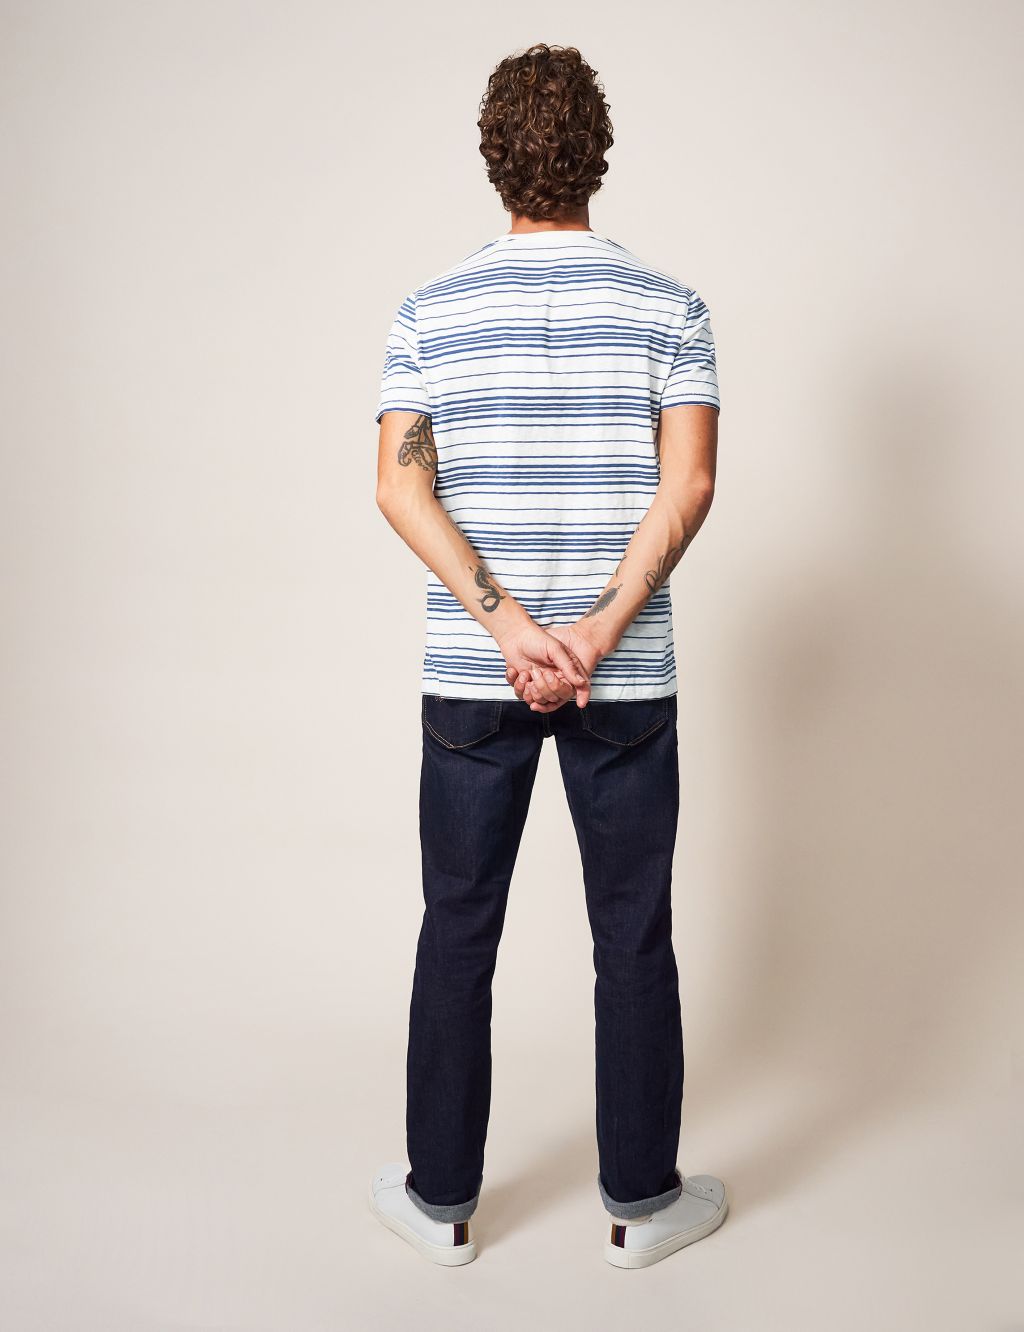 Relaxed Fit Pure Cotton Striped T-Shirt image 4